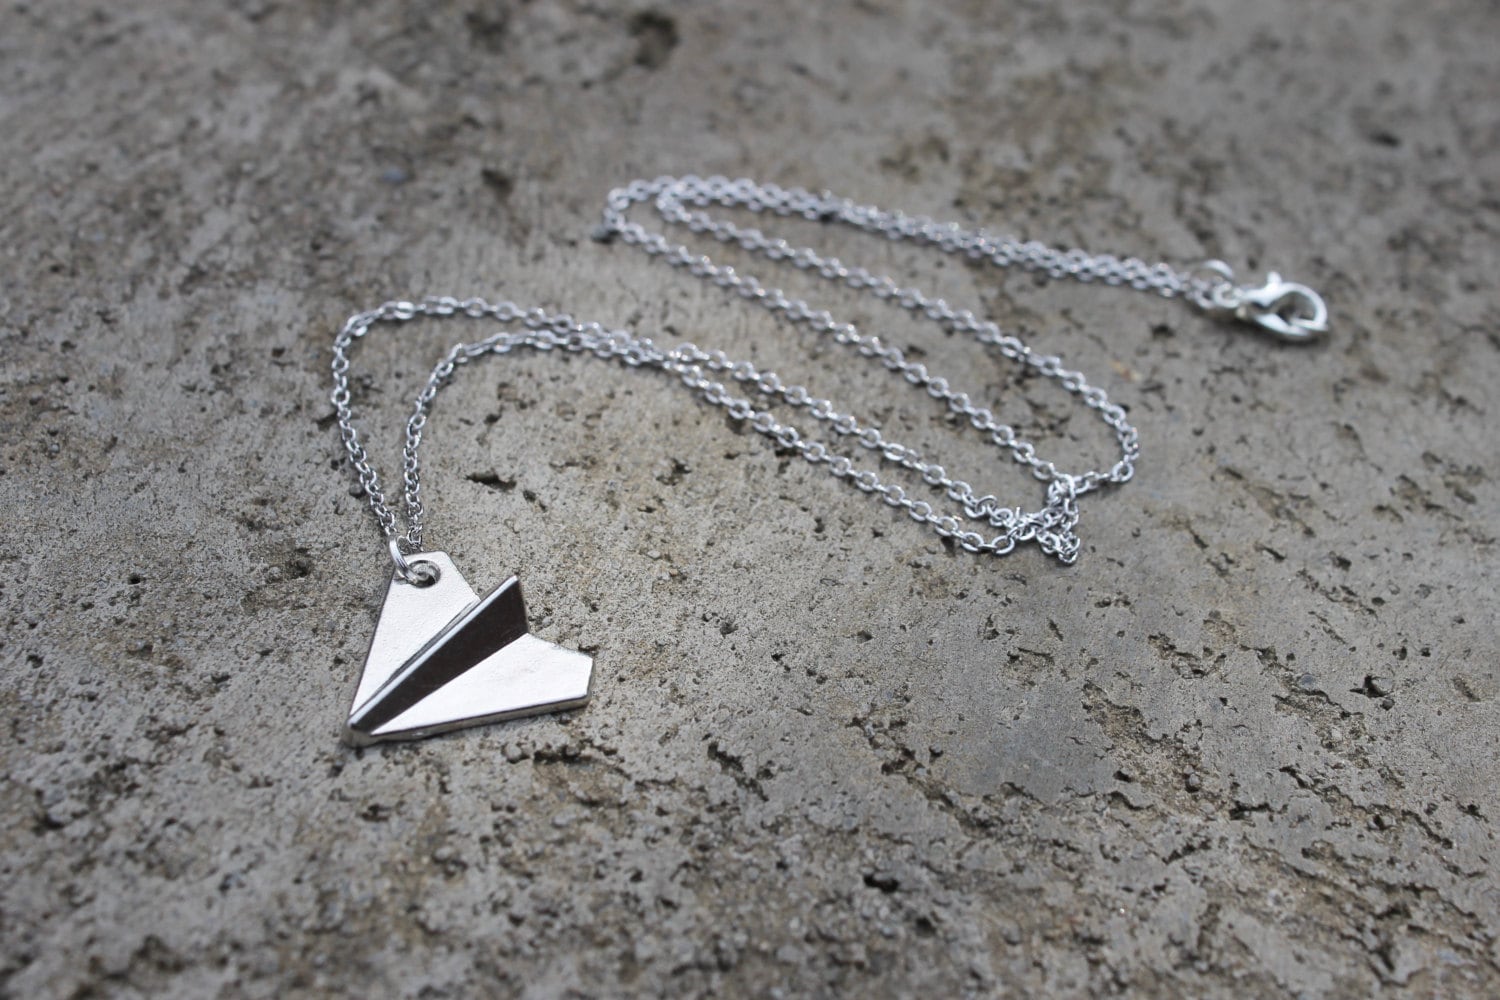 Necklaces Paper Airplane 